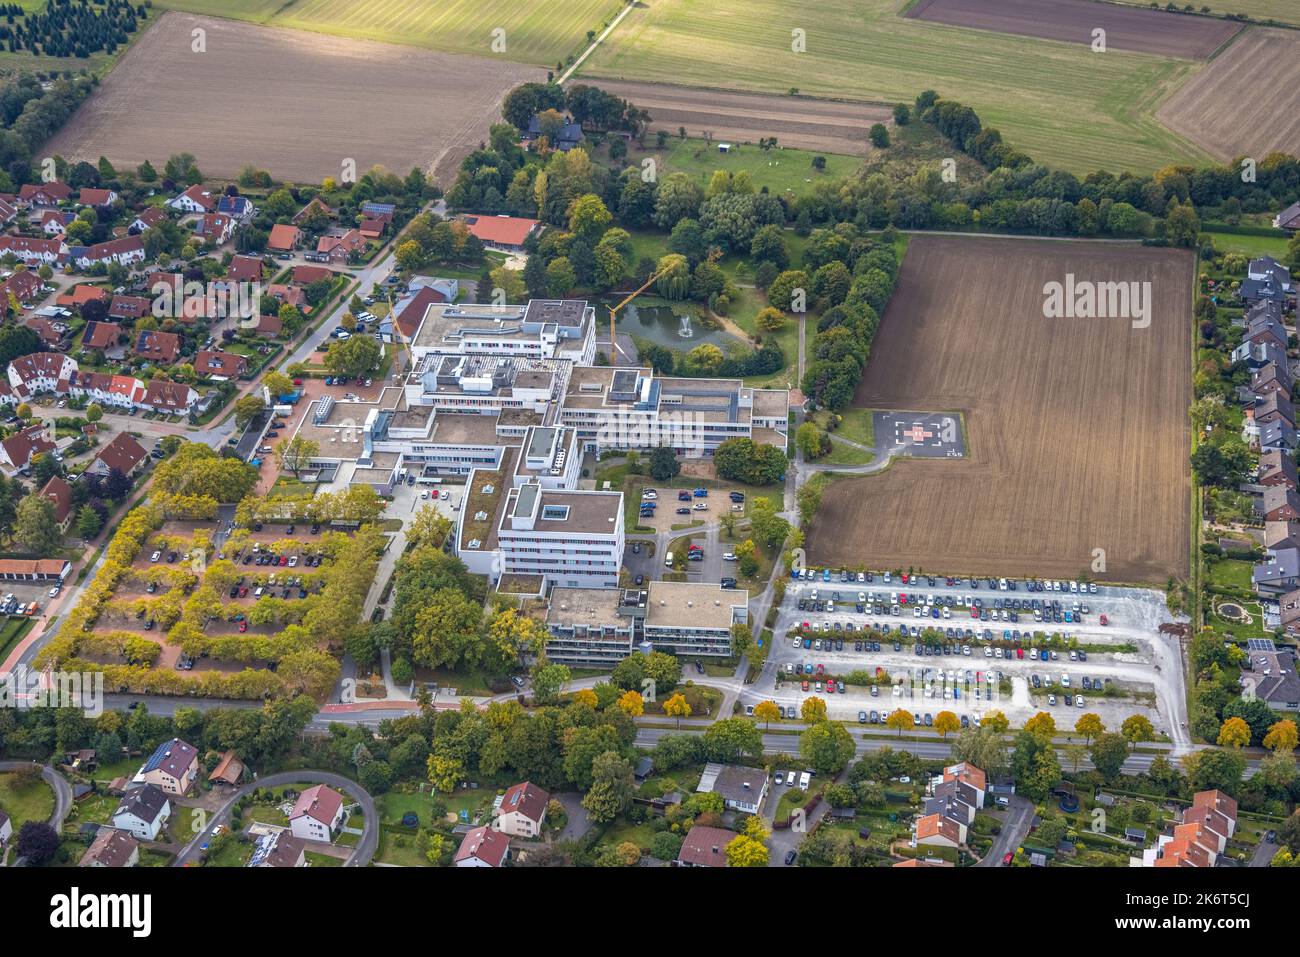 Aerial view, Soest Clinic, Soest, Soester Börde, North Rhine-Westphalia, Germany, DE, Europe, Healthcare, Hospital, Helipad, Clinic, Clinical centre, Stock Photo